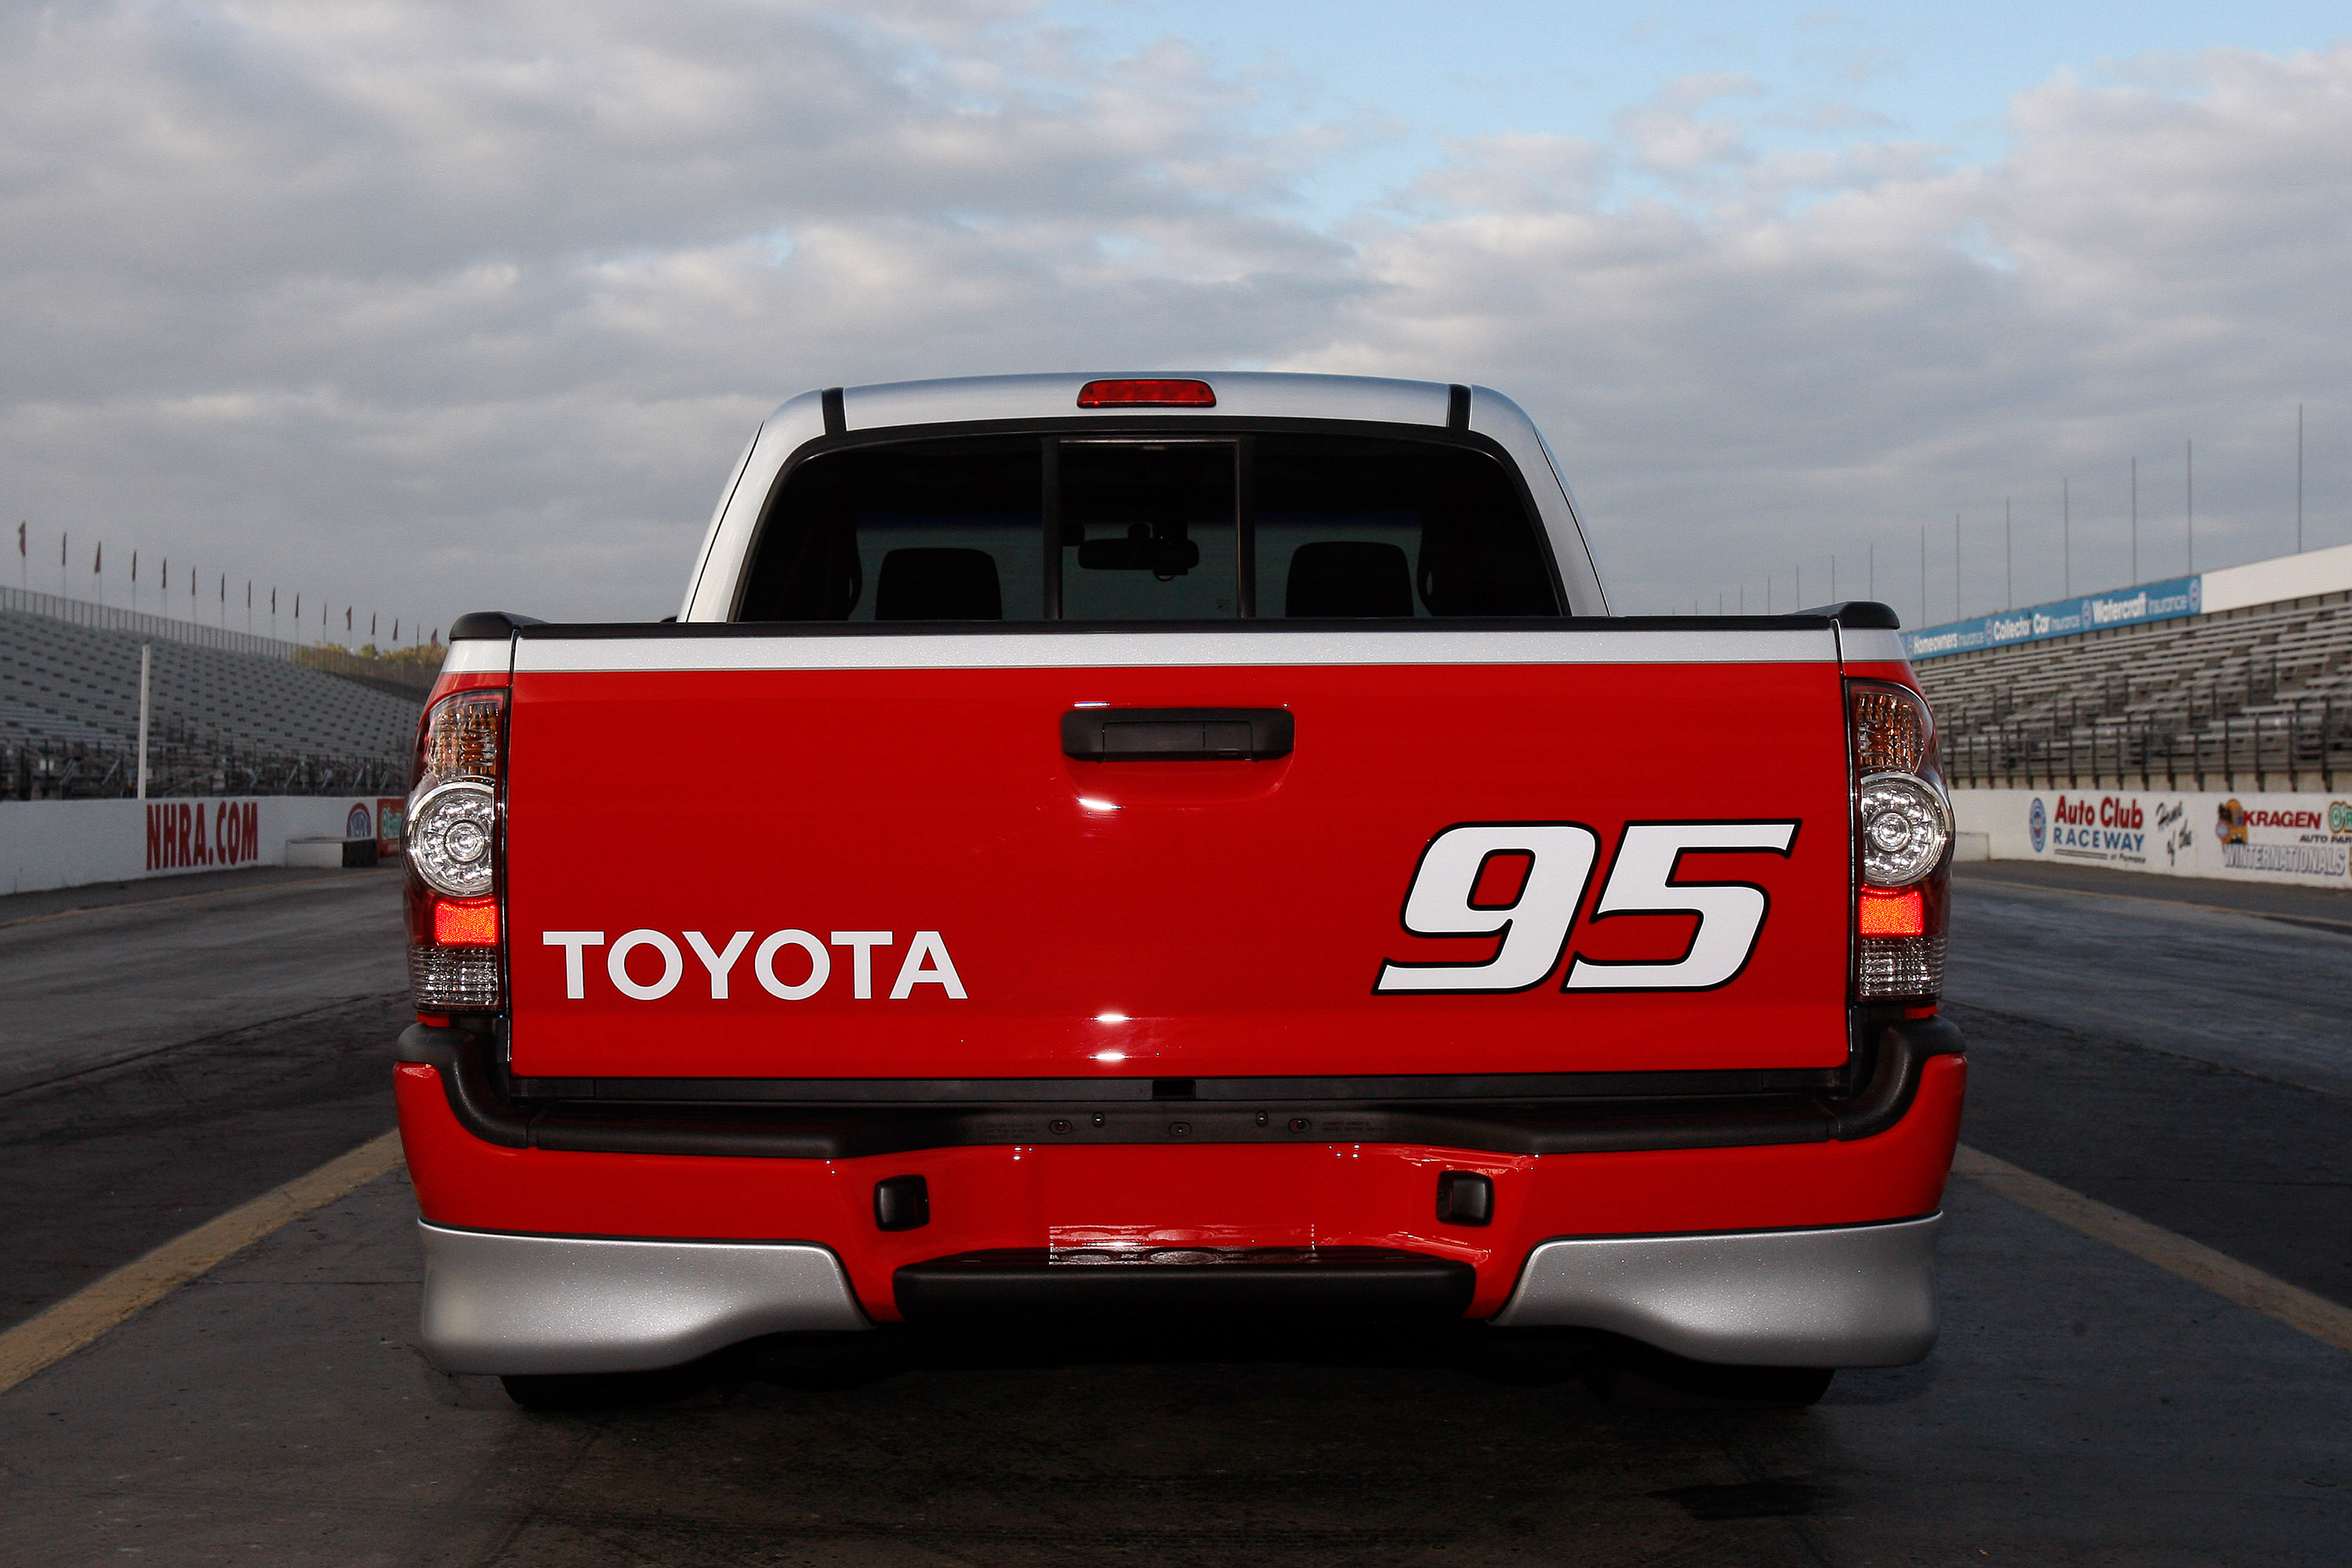 Toyota Tacoma X-Runner RTR (Ready to Race)